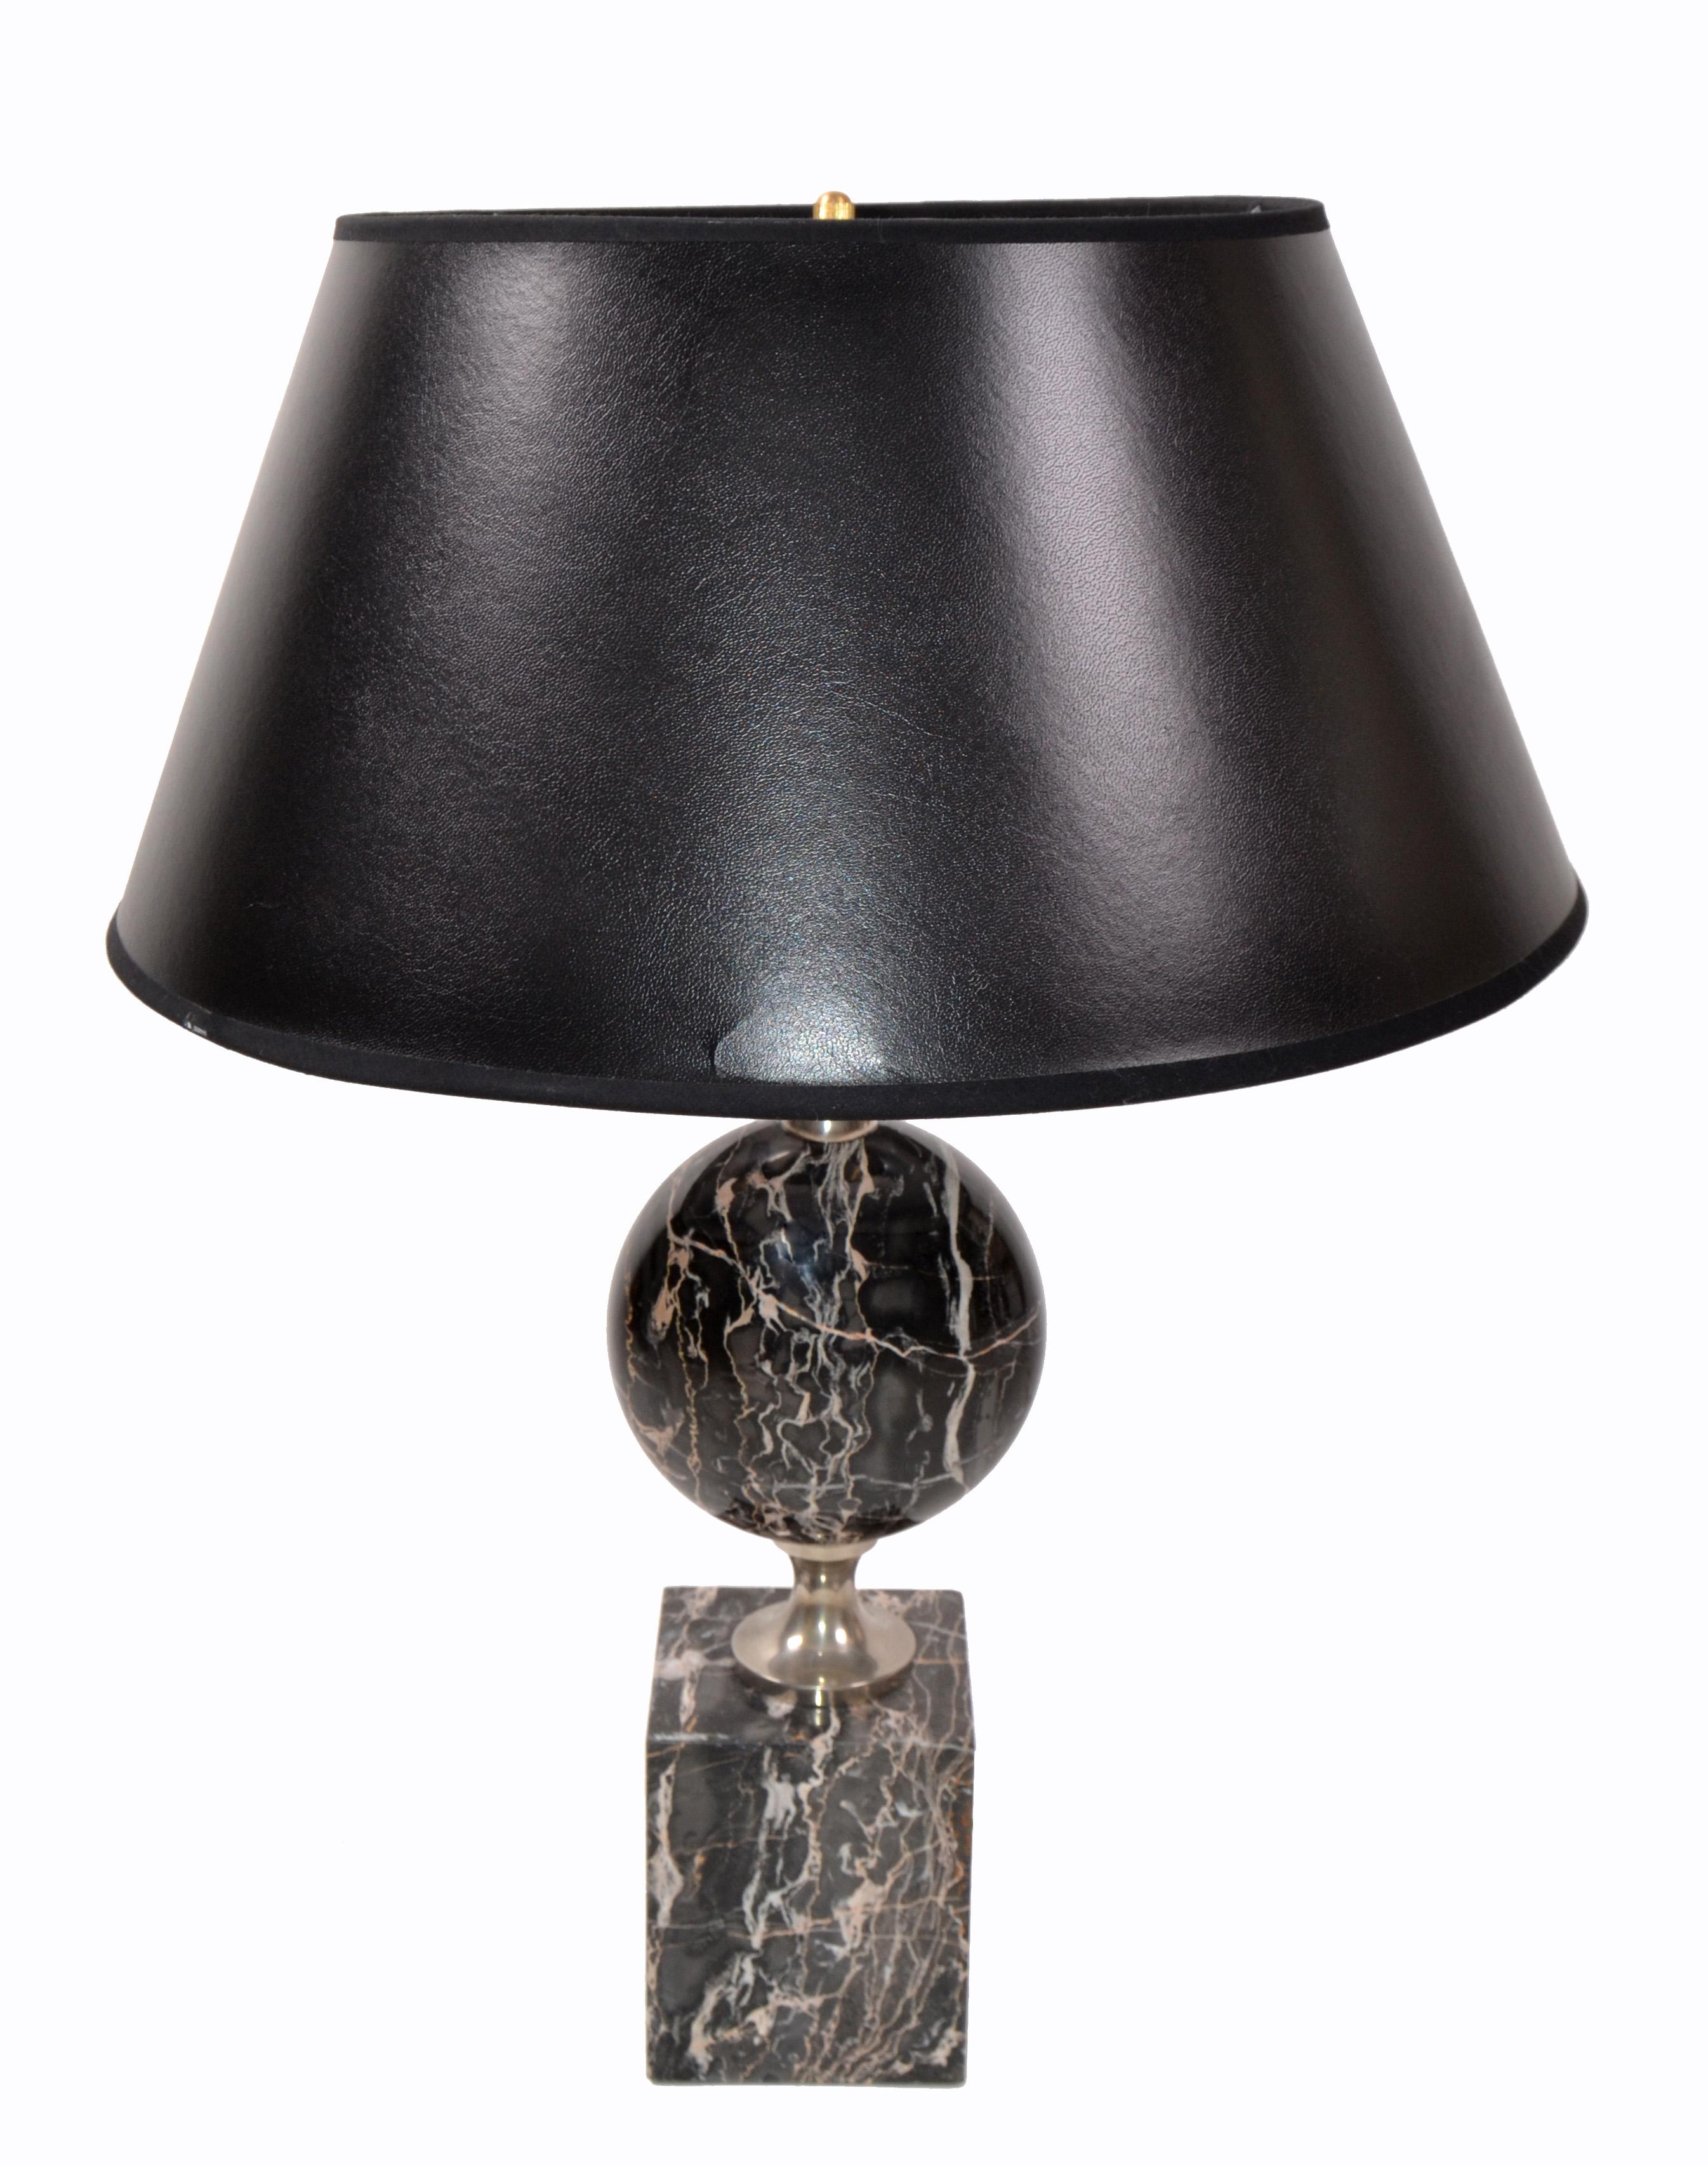 Maison Barbier French Marble and Chrome Table Lamp, 1960 For Sale 5